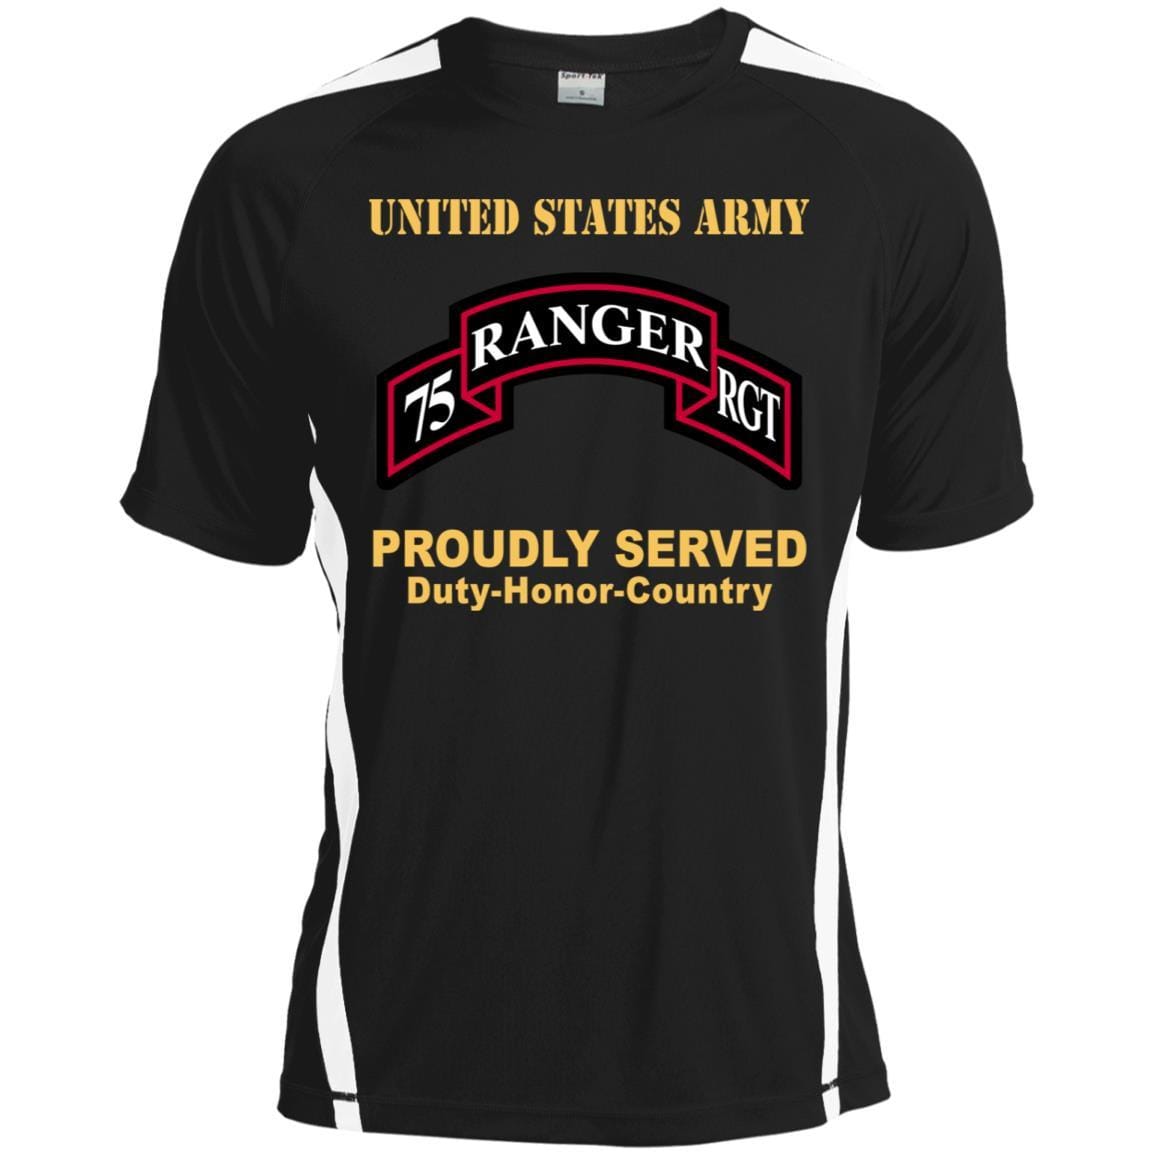 US ARMY 75TH RANGER REGIMENT - Proudly Served T-Shirt On Front For Men-TShirt-Army-Veterans Nation